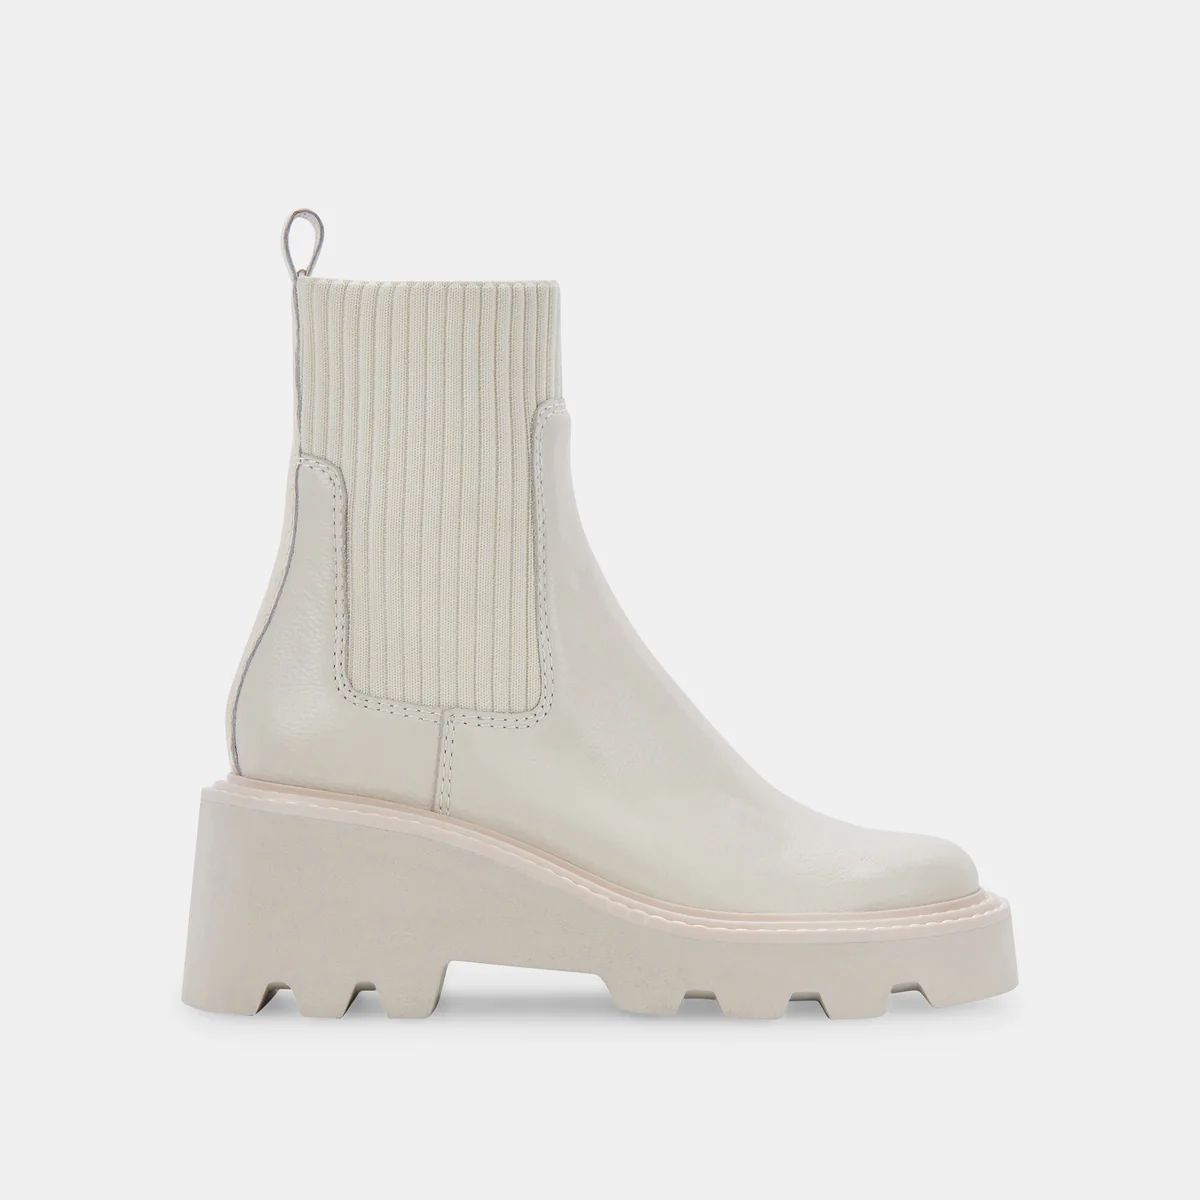 HOVEN H2O BOOTS IVORY LEATHER | DolceVita.com